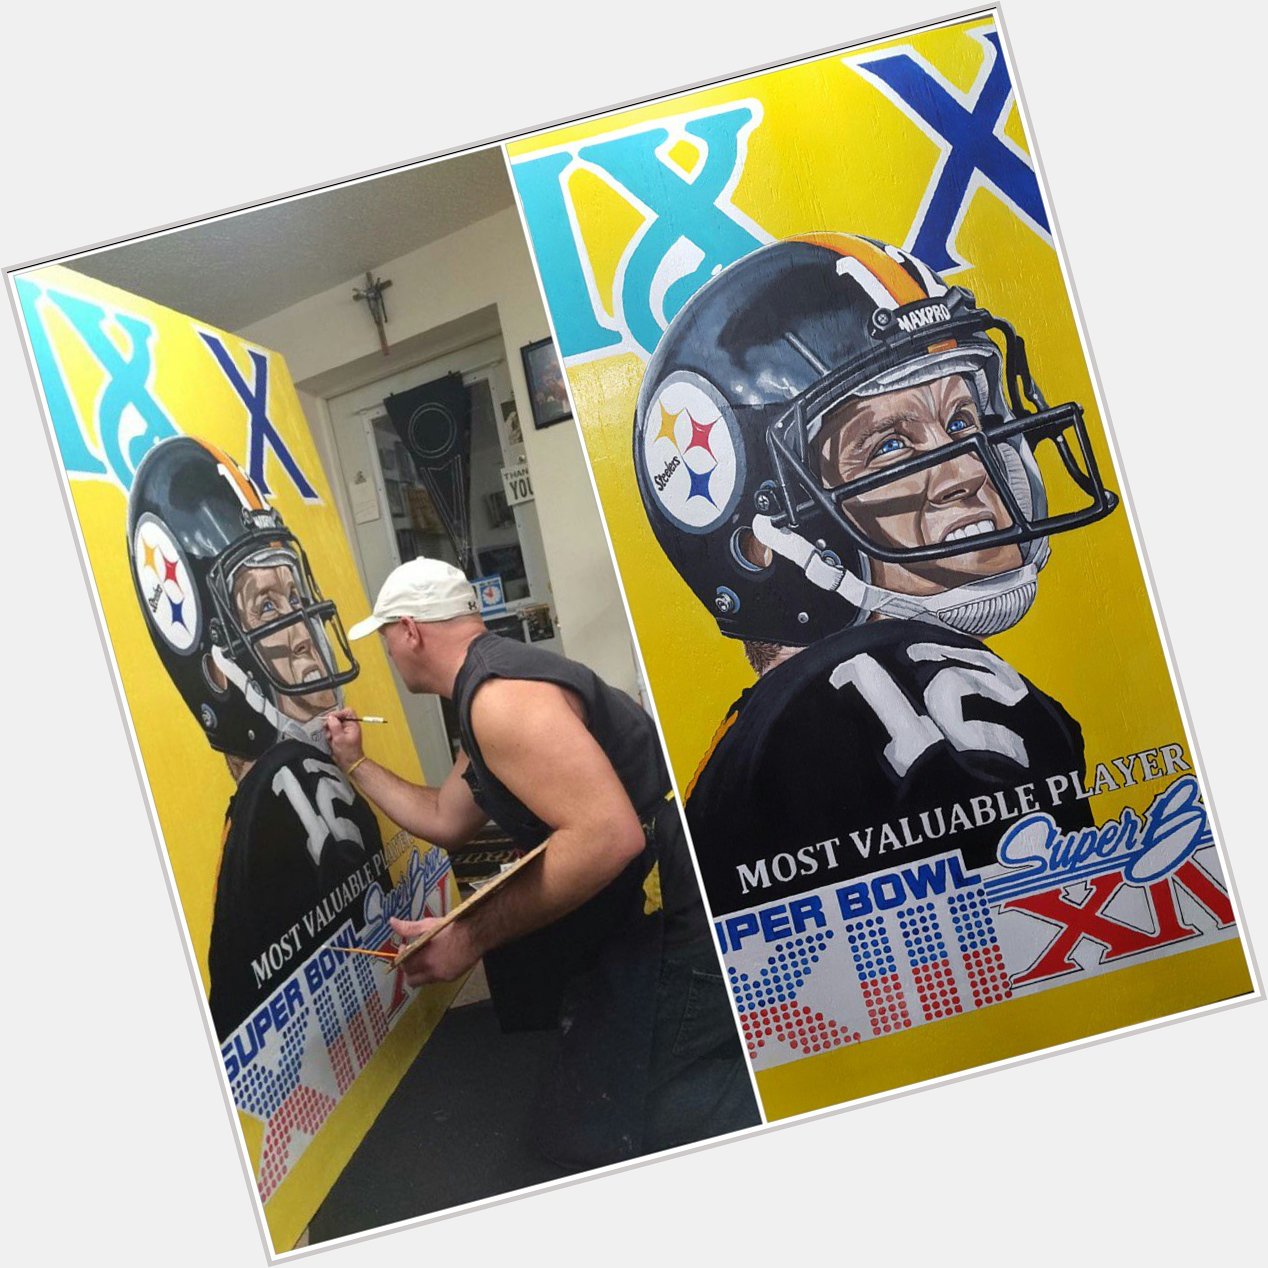 Happy birthday to Steeler great Terry Bradshaw. Had a lot of fun painting this 6 ft tall piece. 